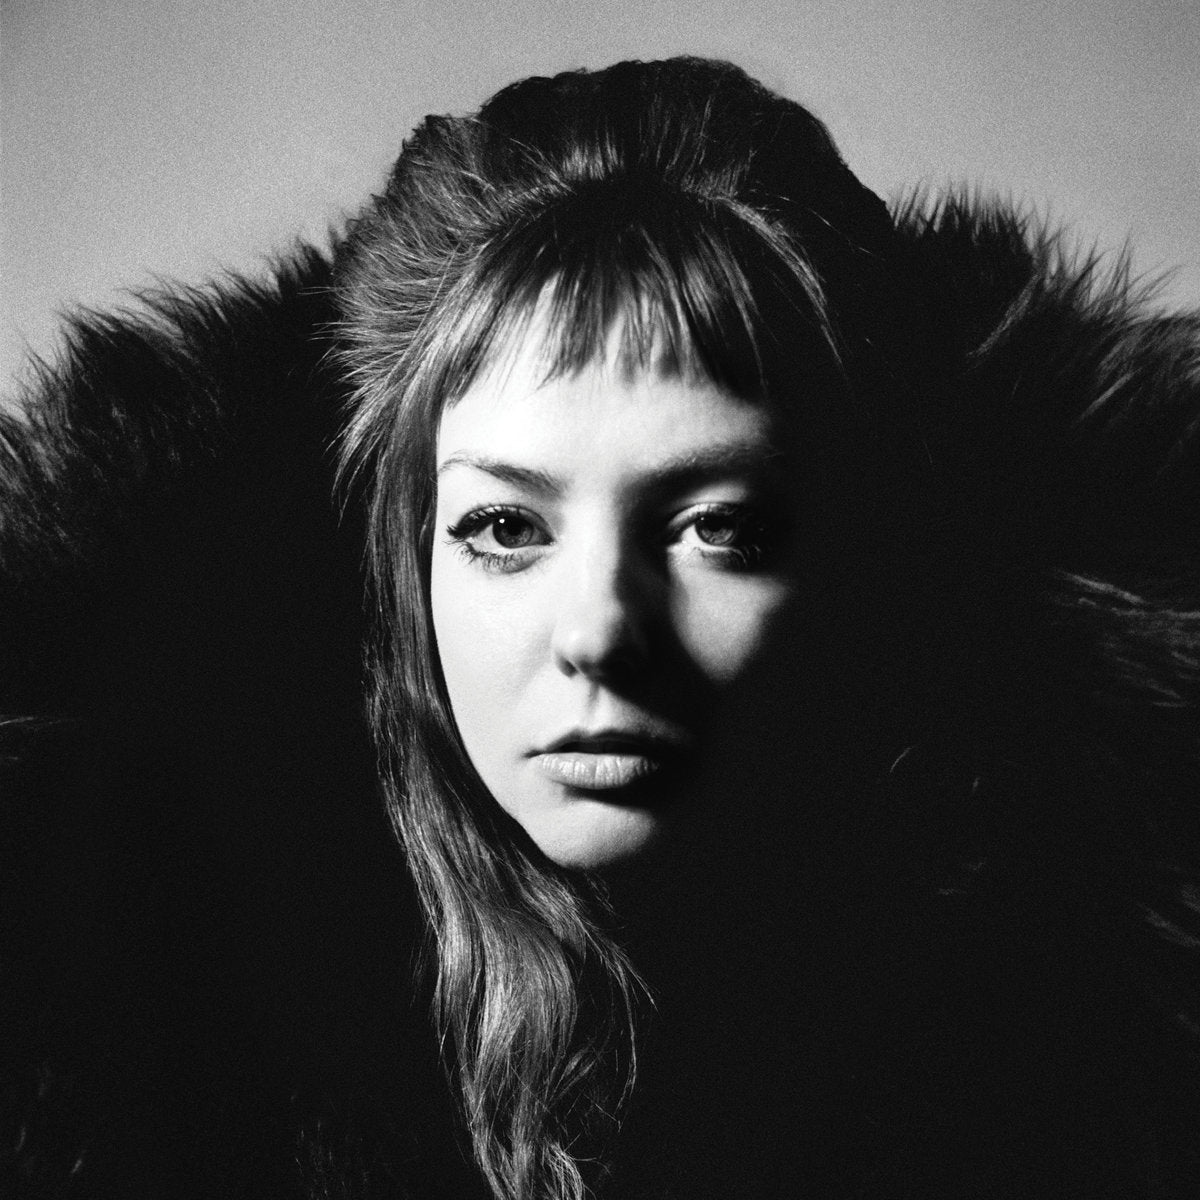 Angel Olsen - All Mirrors (Double Black Vinyl + 12-Page Photo Booklet & Poster)